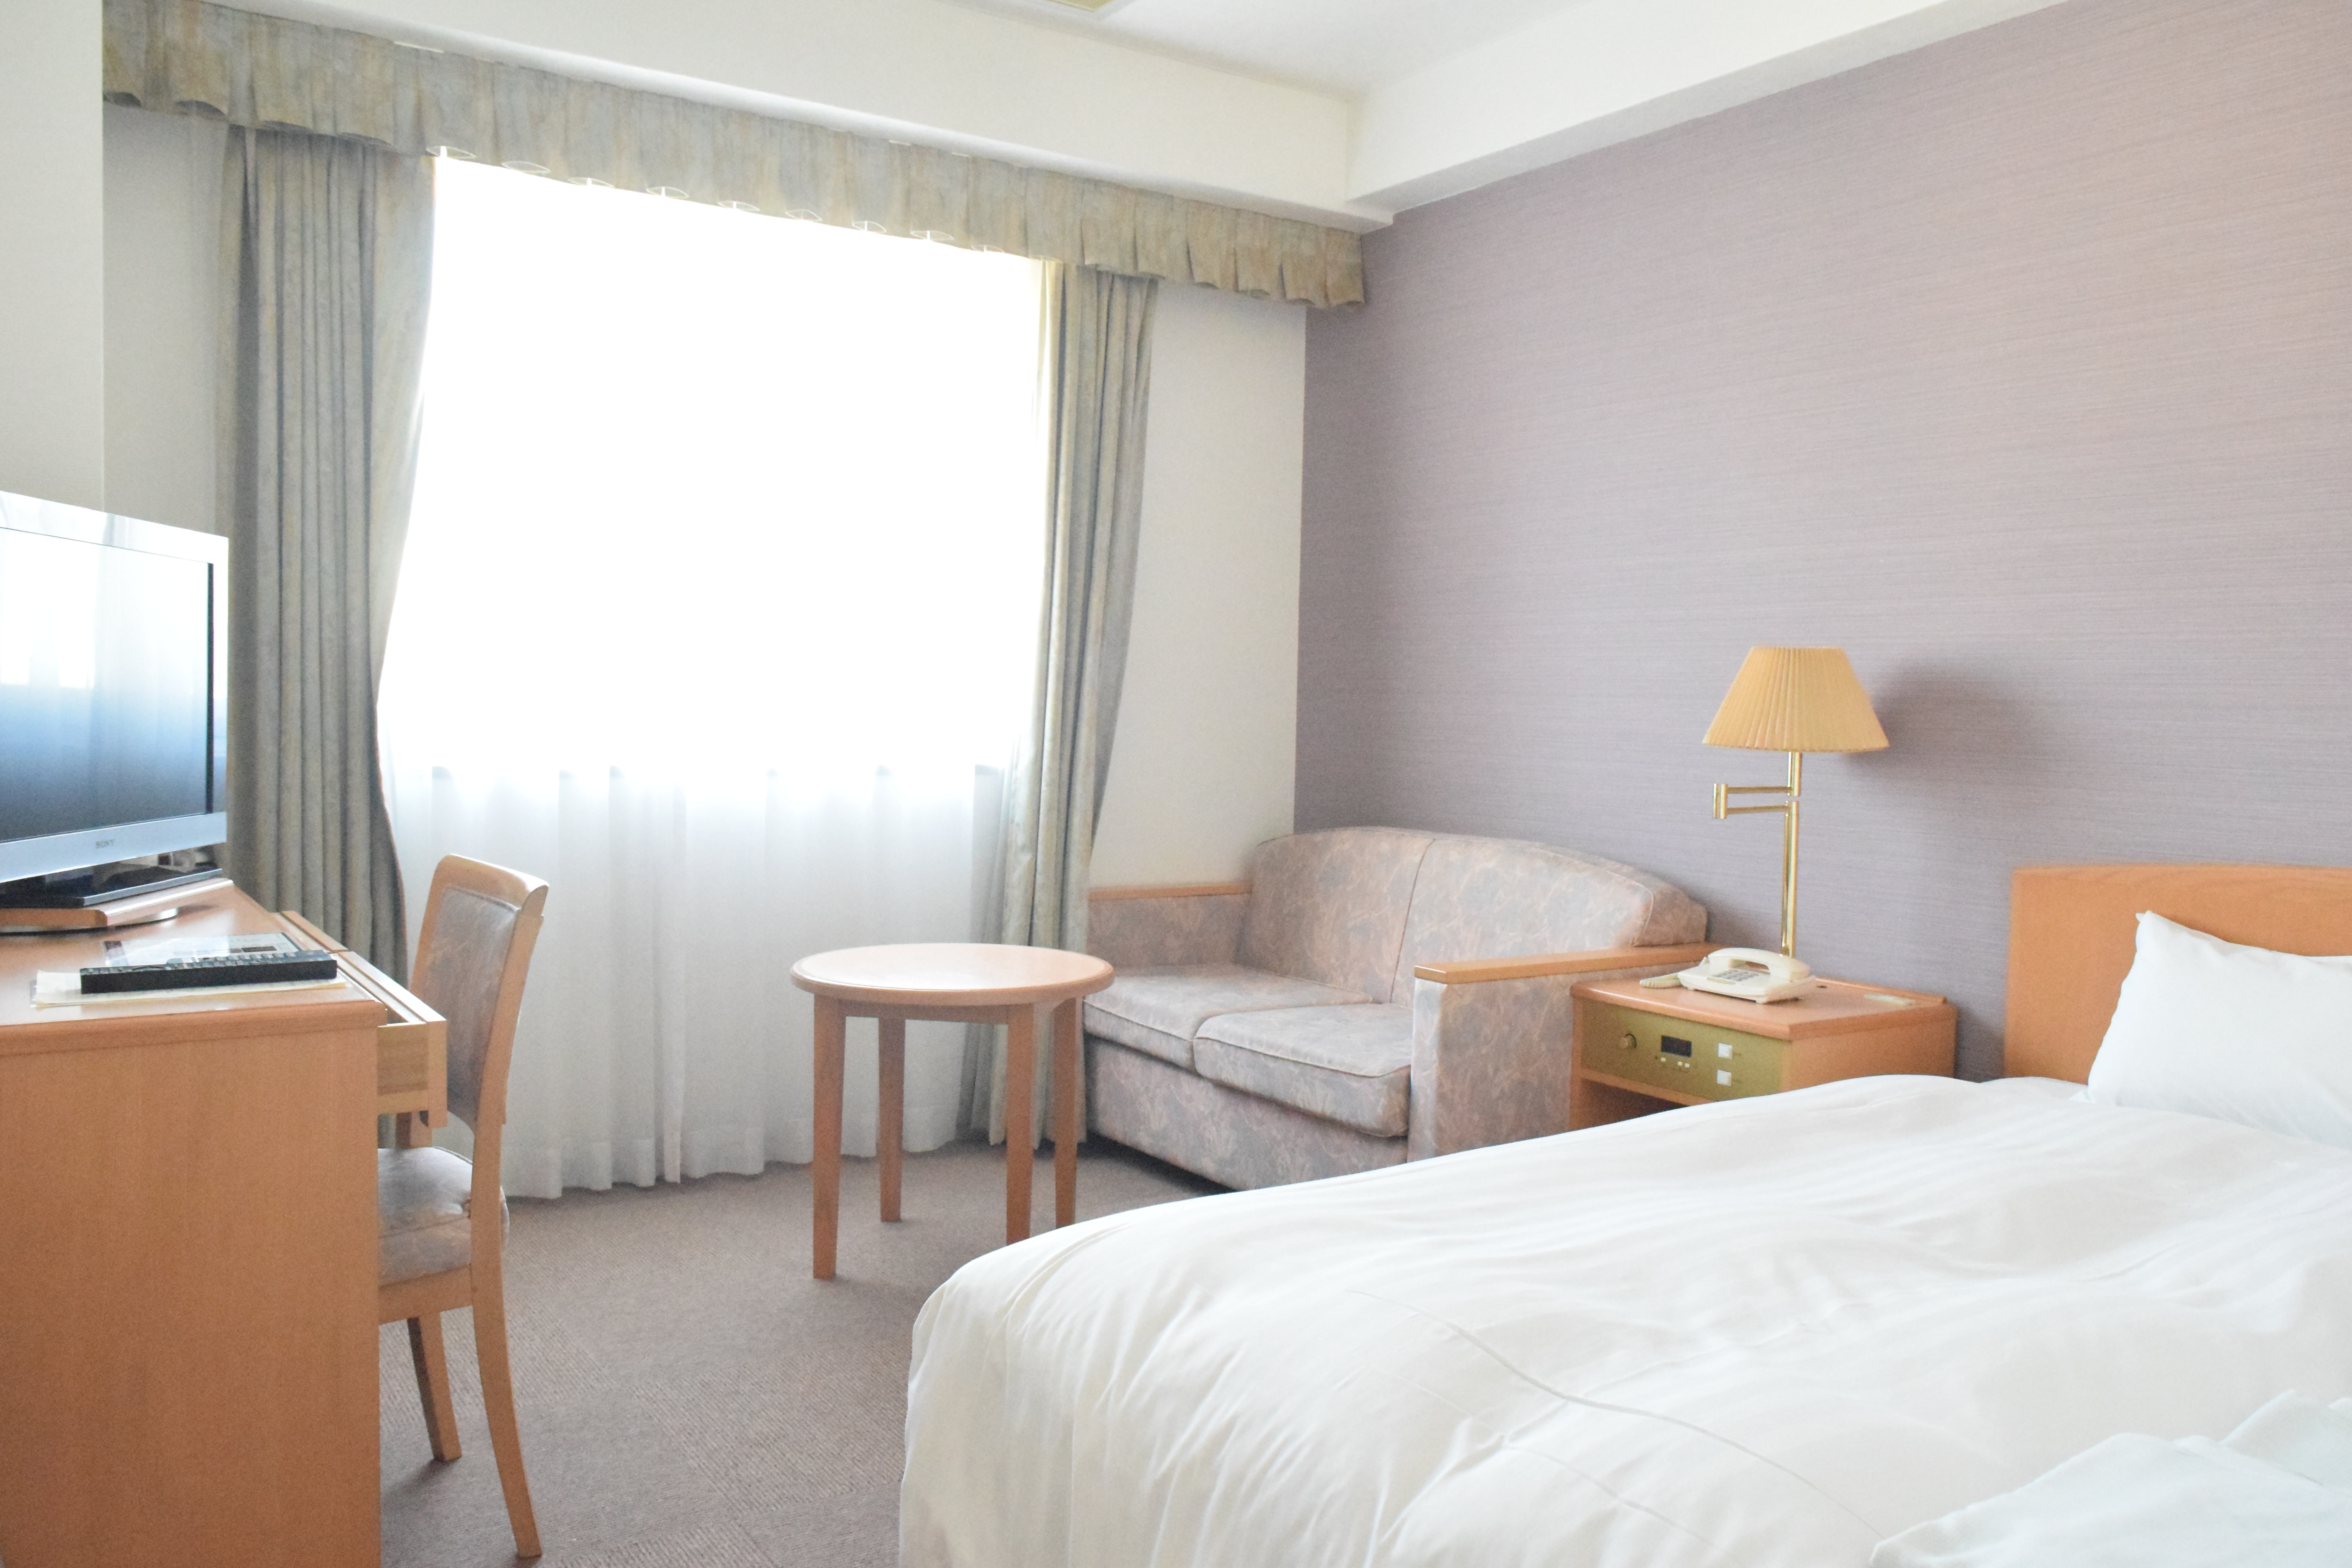 [Single Room C] [Double Room C] A 140 cm wide double bed is available in a spacious 18 m2 room.